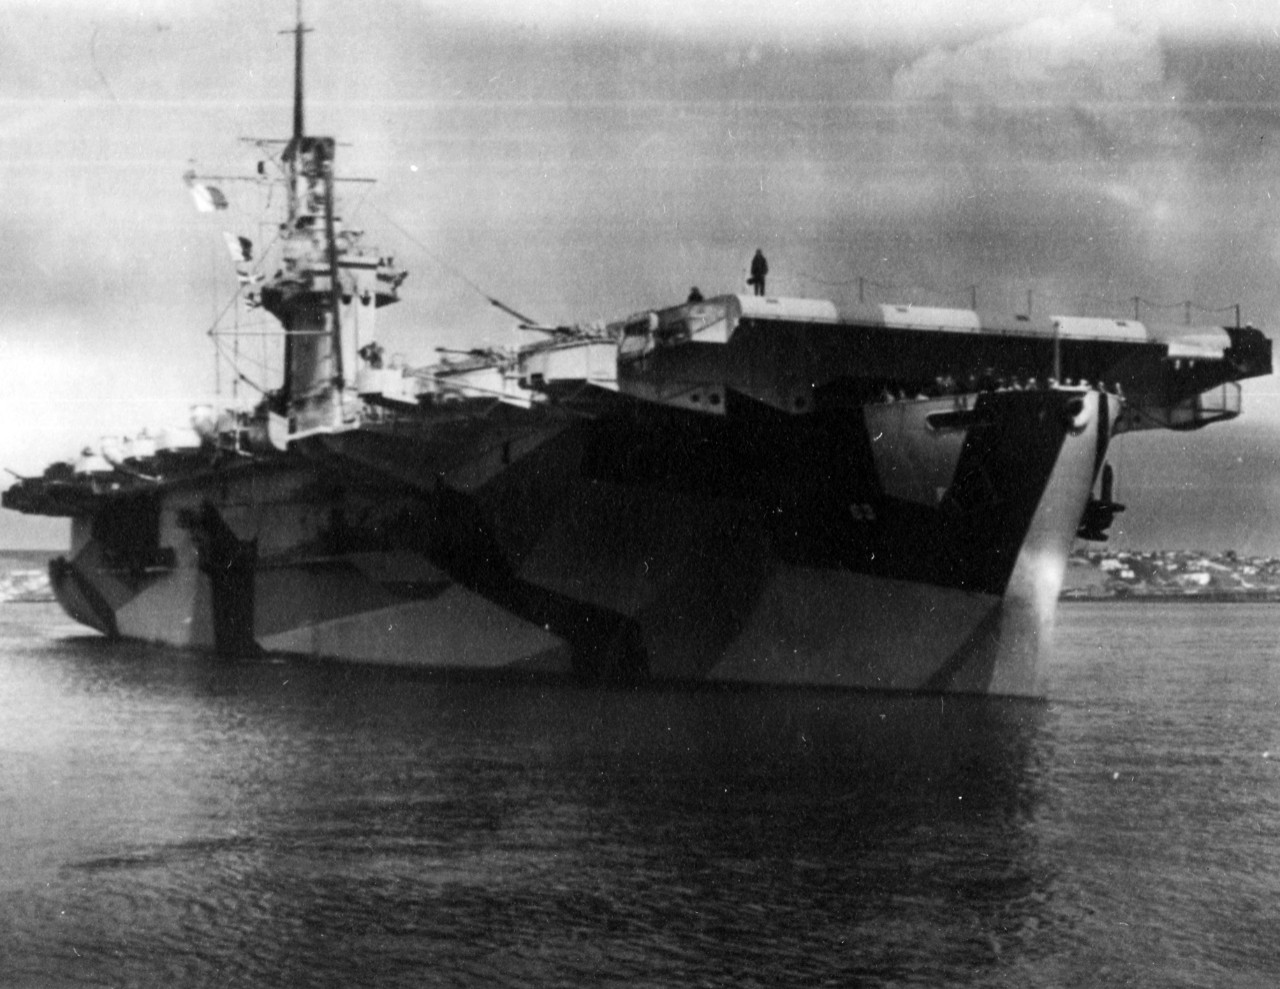 <p>The bow of USS St. Lo (CVE-63), formerly USS Midway. April 7, 1944.</p>
